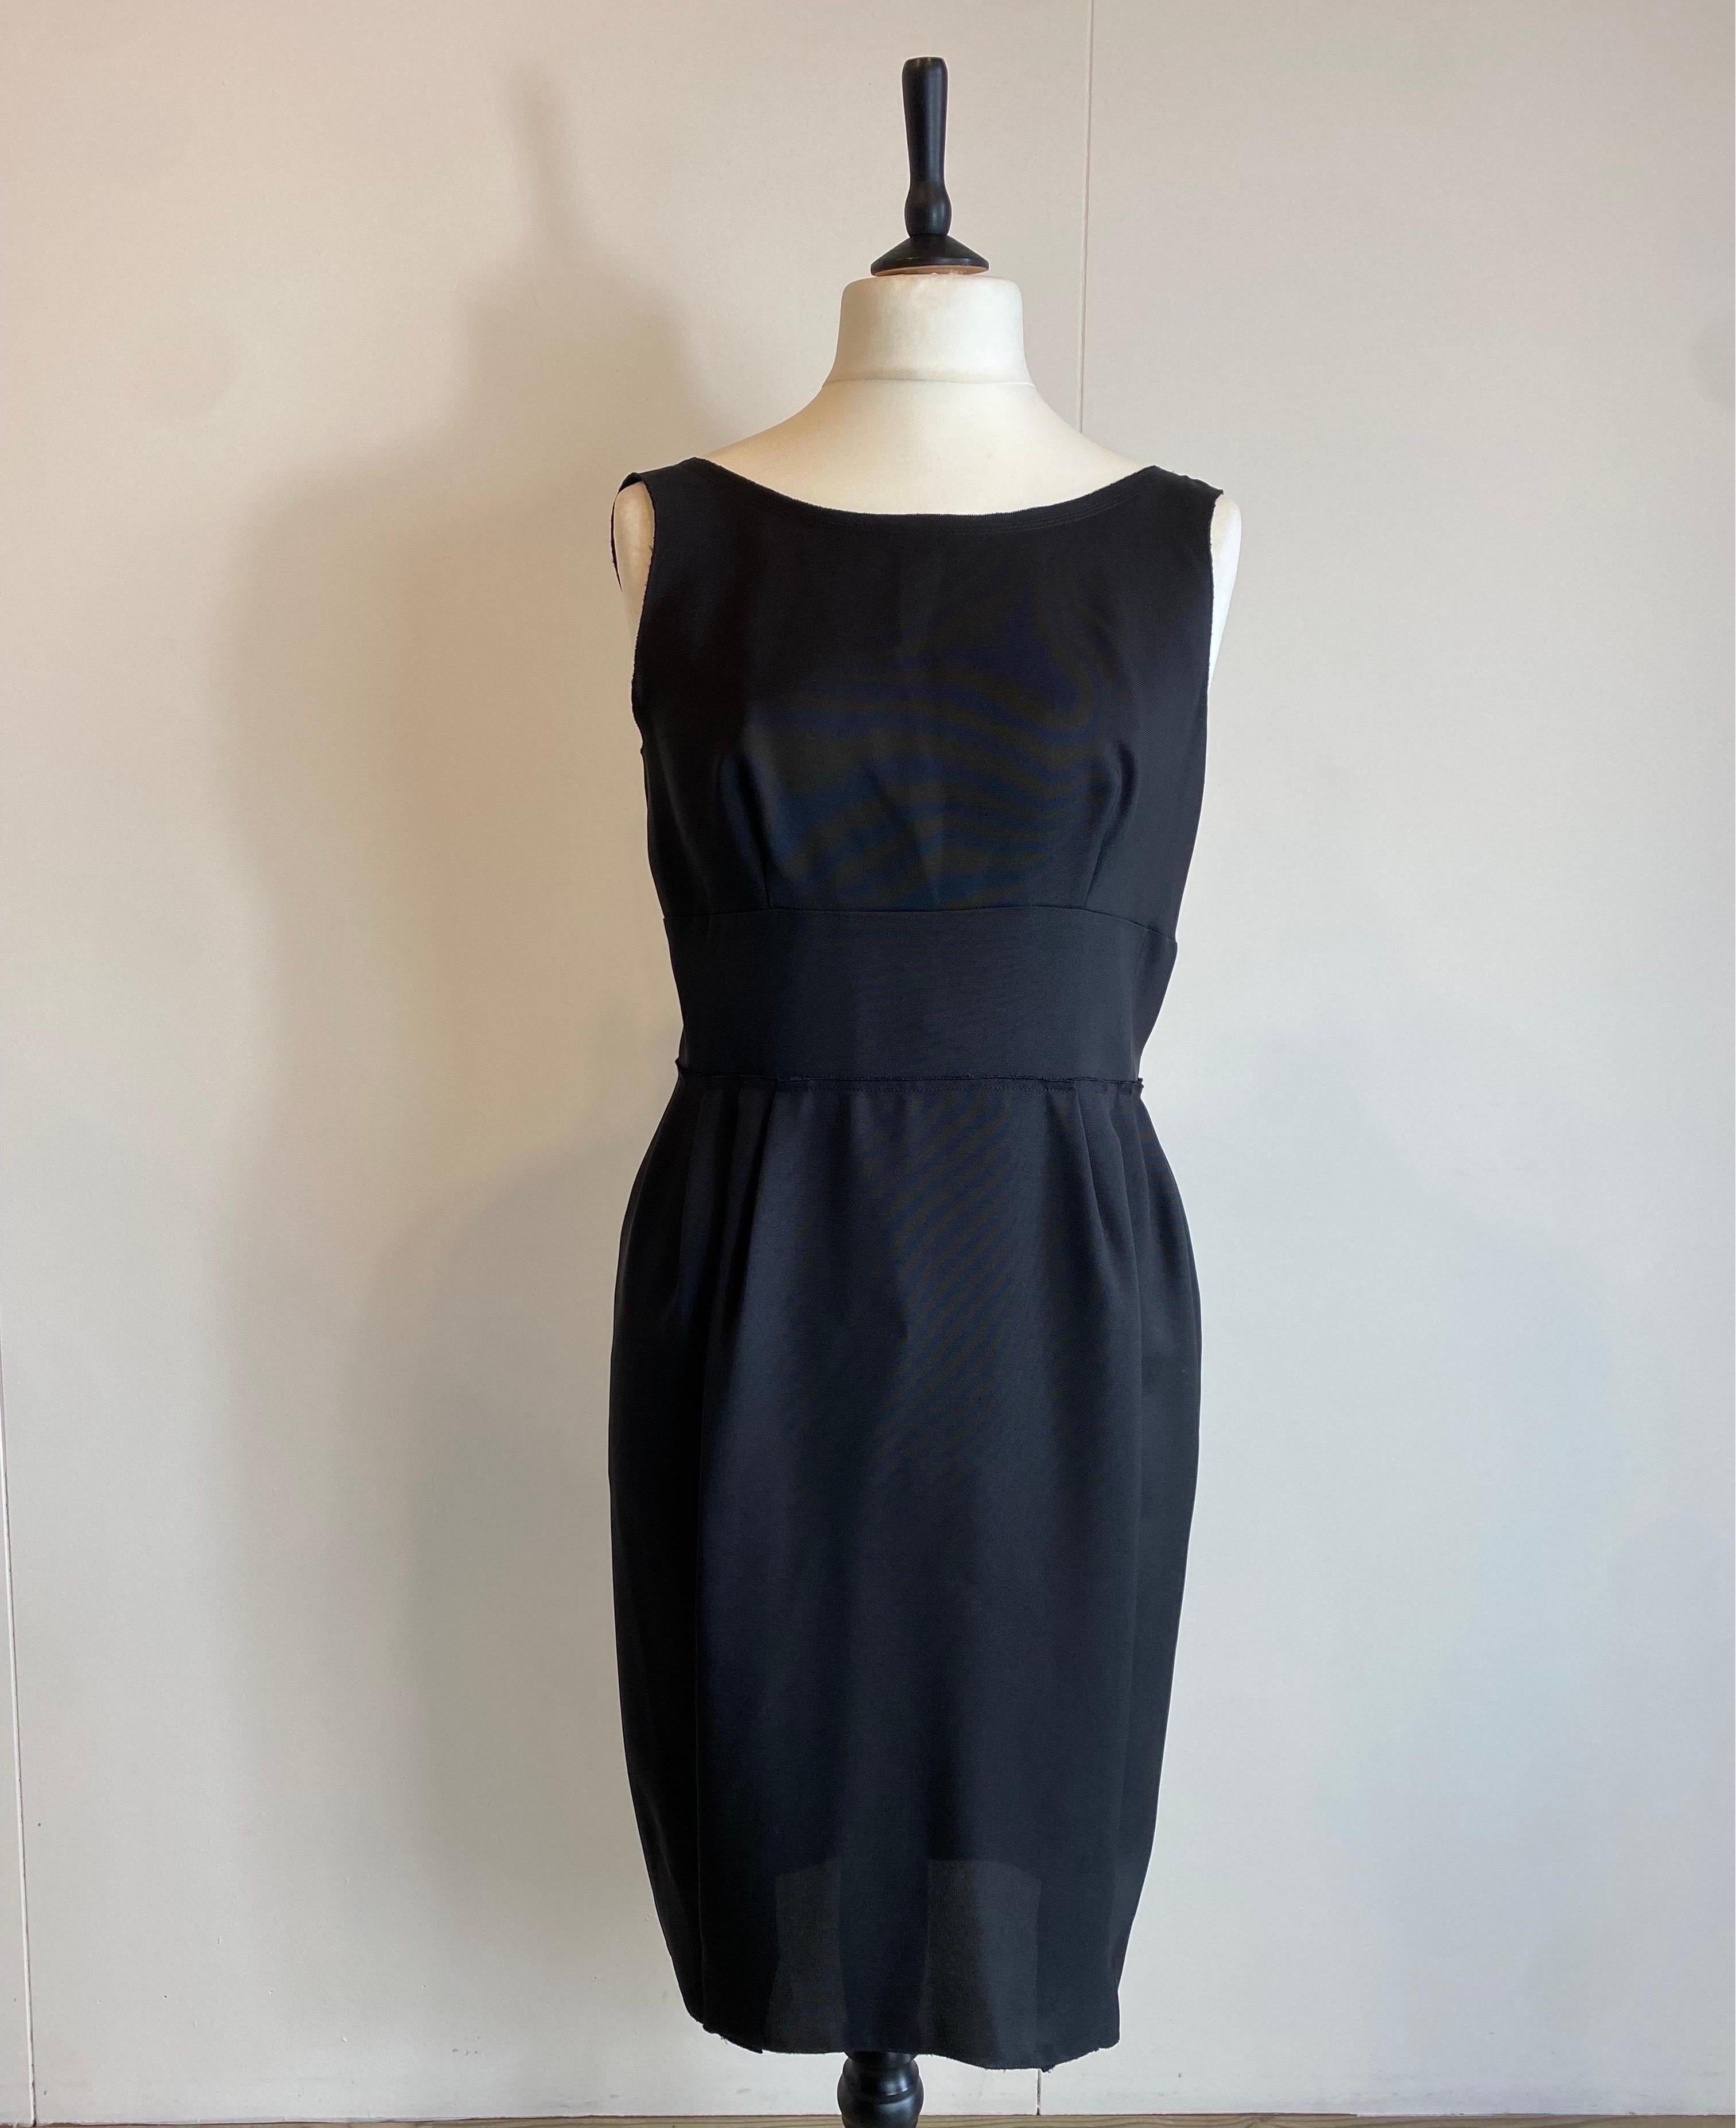 Prada sheath dress.
In black triacetate.
Back closure with zip and buttons.
Italian size 46
Shoulders 35 cm
Bust 45 cm
Waist 40cm
Length 98 cm
Excellent general condition, shows signs of normal use.